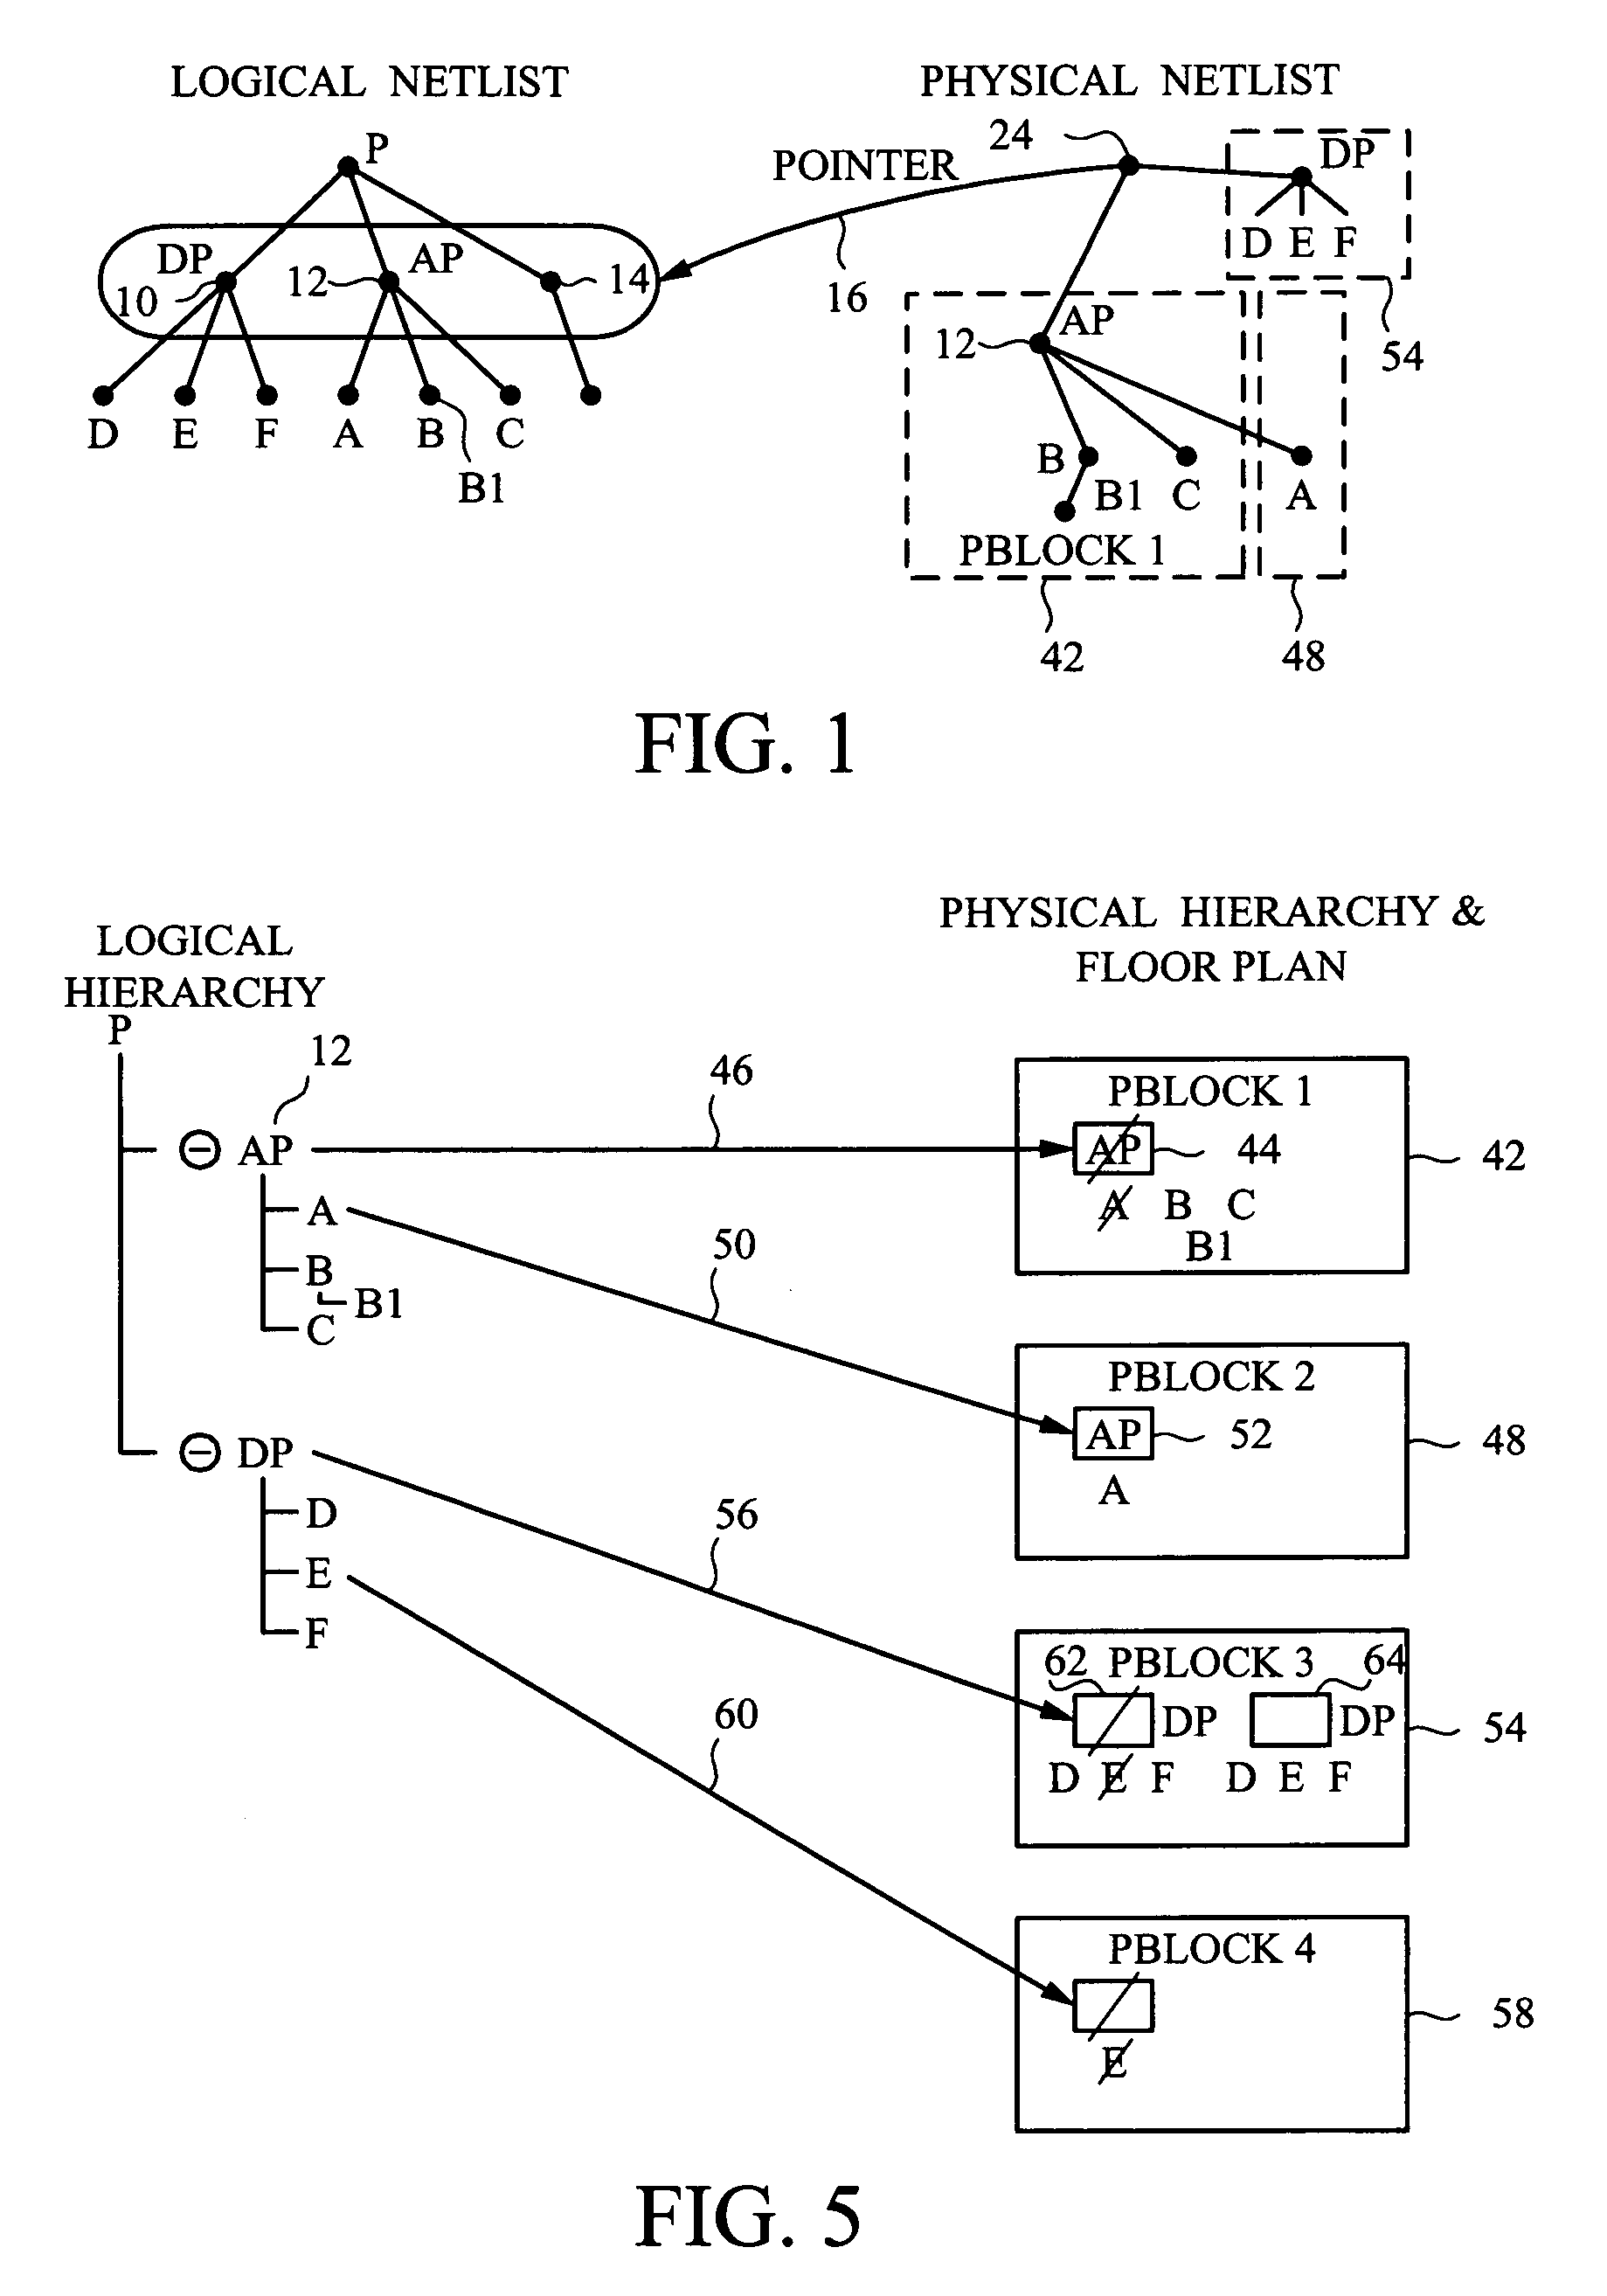 Process for adjusting data structures of a floorplan upon changes occurring